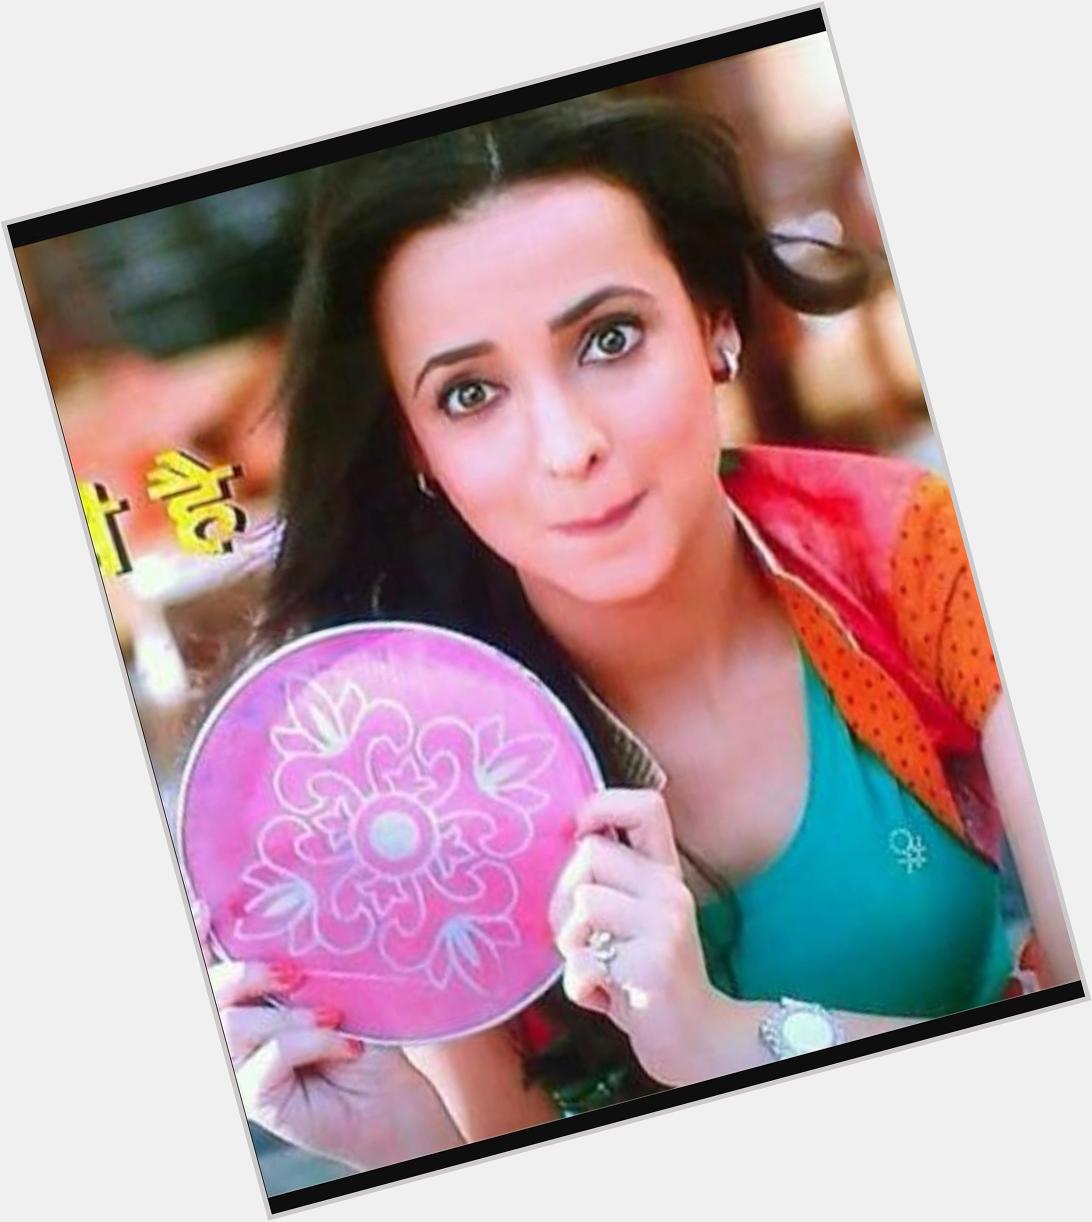 Happy birthday sanaya Irani wish all the best for you and your family  